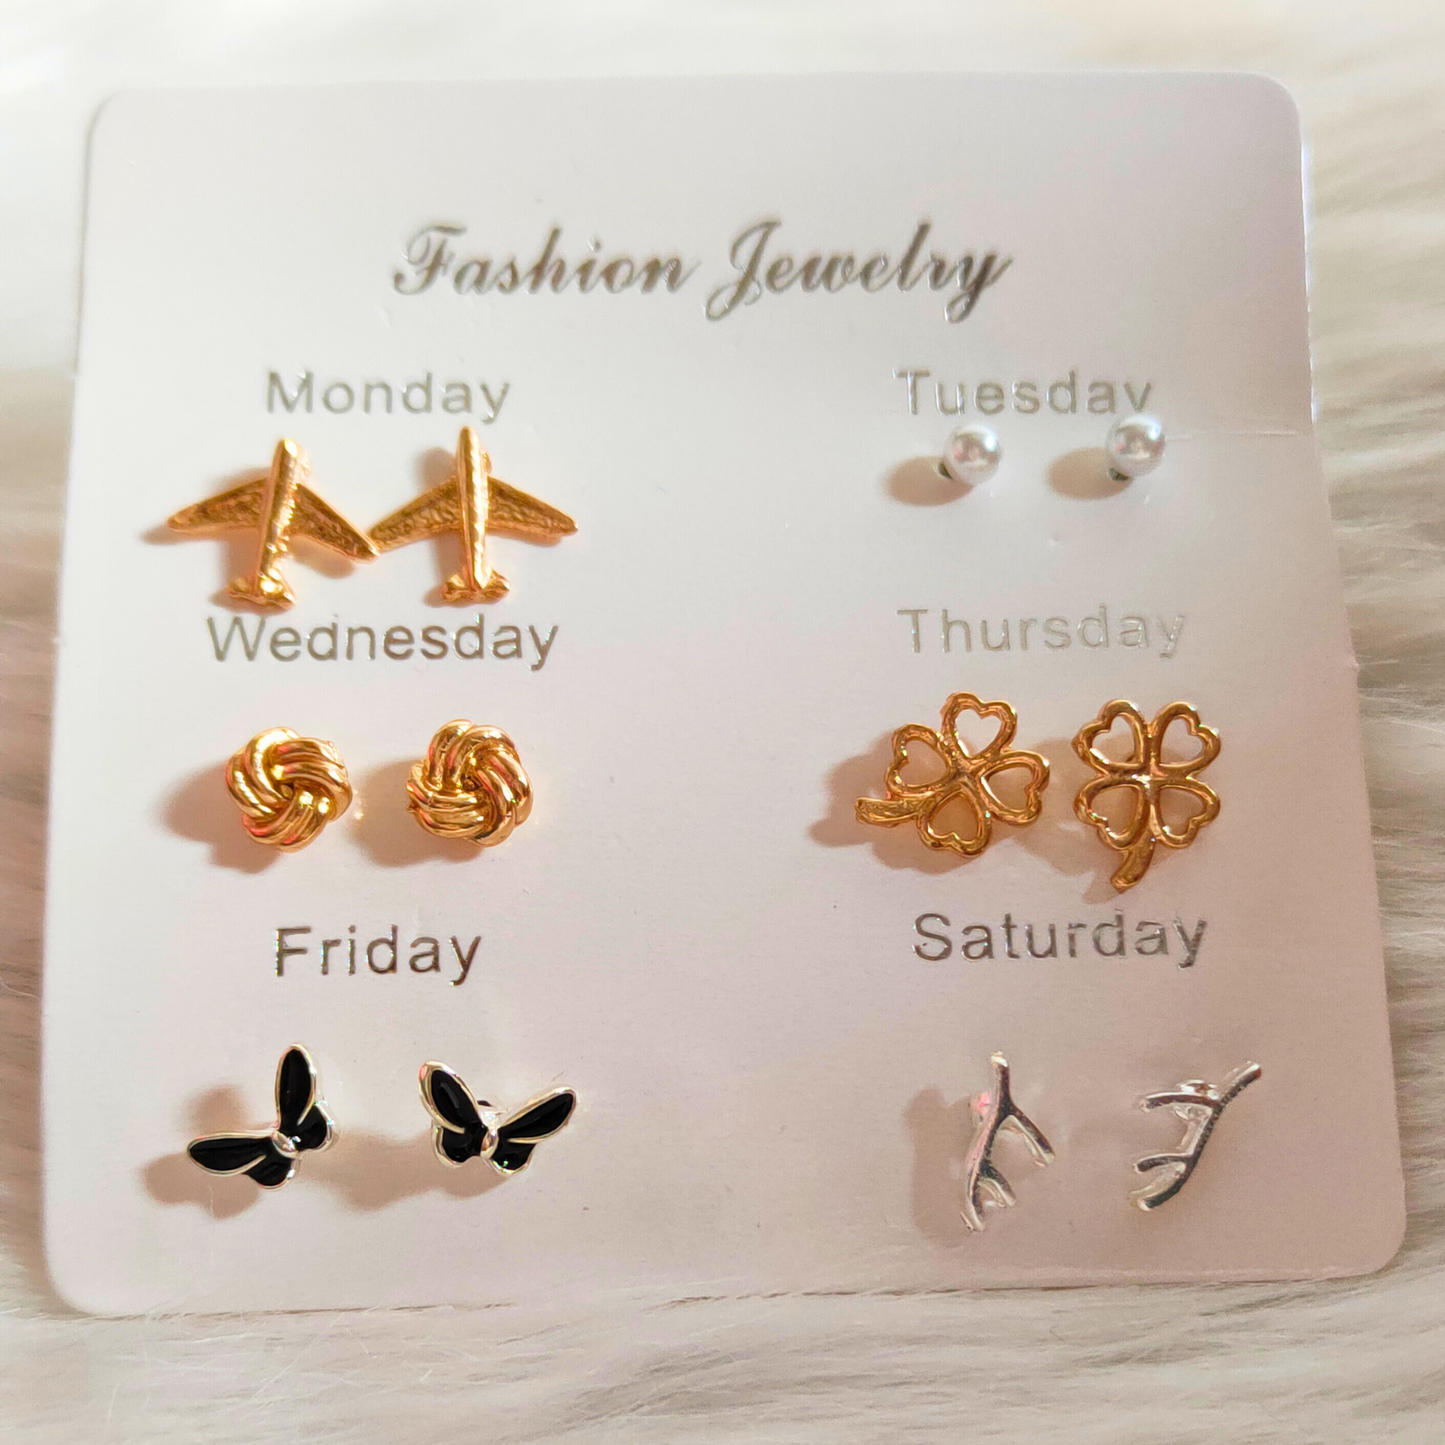 Dahlia combo Earrings, Hypoallergenic, Light weight, Everyday wear, Premium Quality